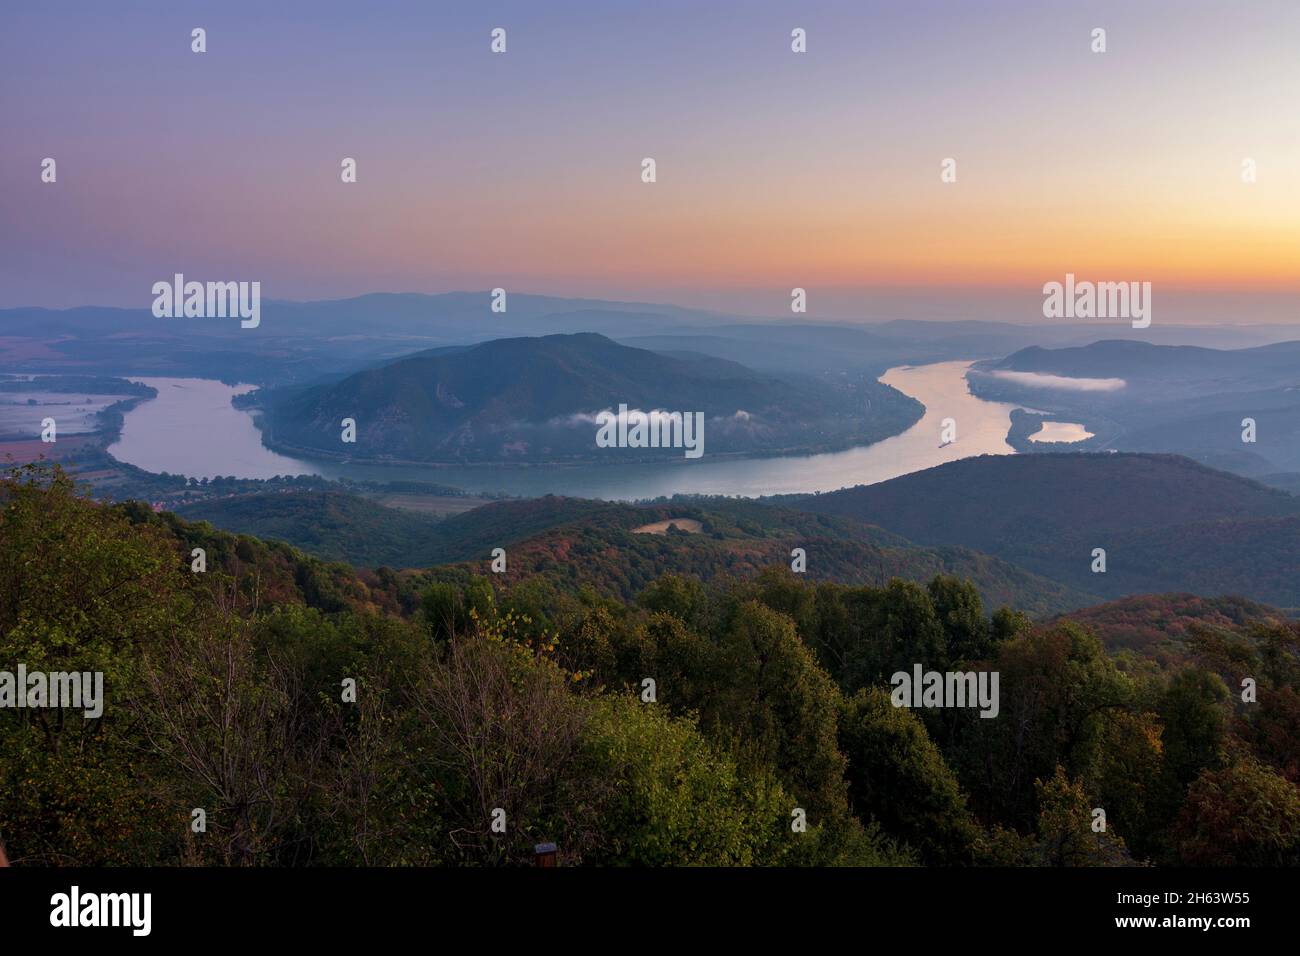 visegrad mountains,bend of danube river,view to börzsöny mountains,view from summit predikaloszek (predigerstuhl,preaching chair),sunrise in danube-ipoly national park,pest,hungary Stock Photo